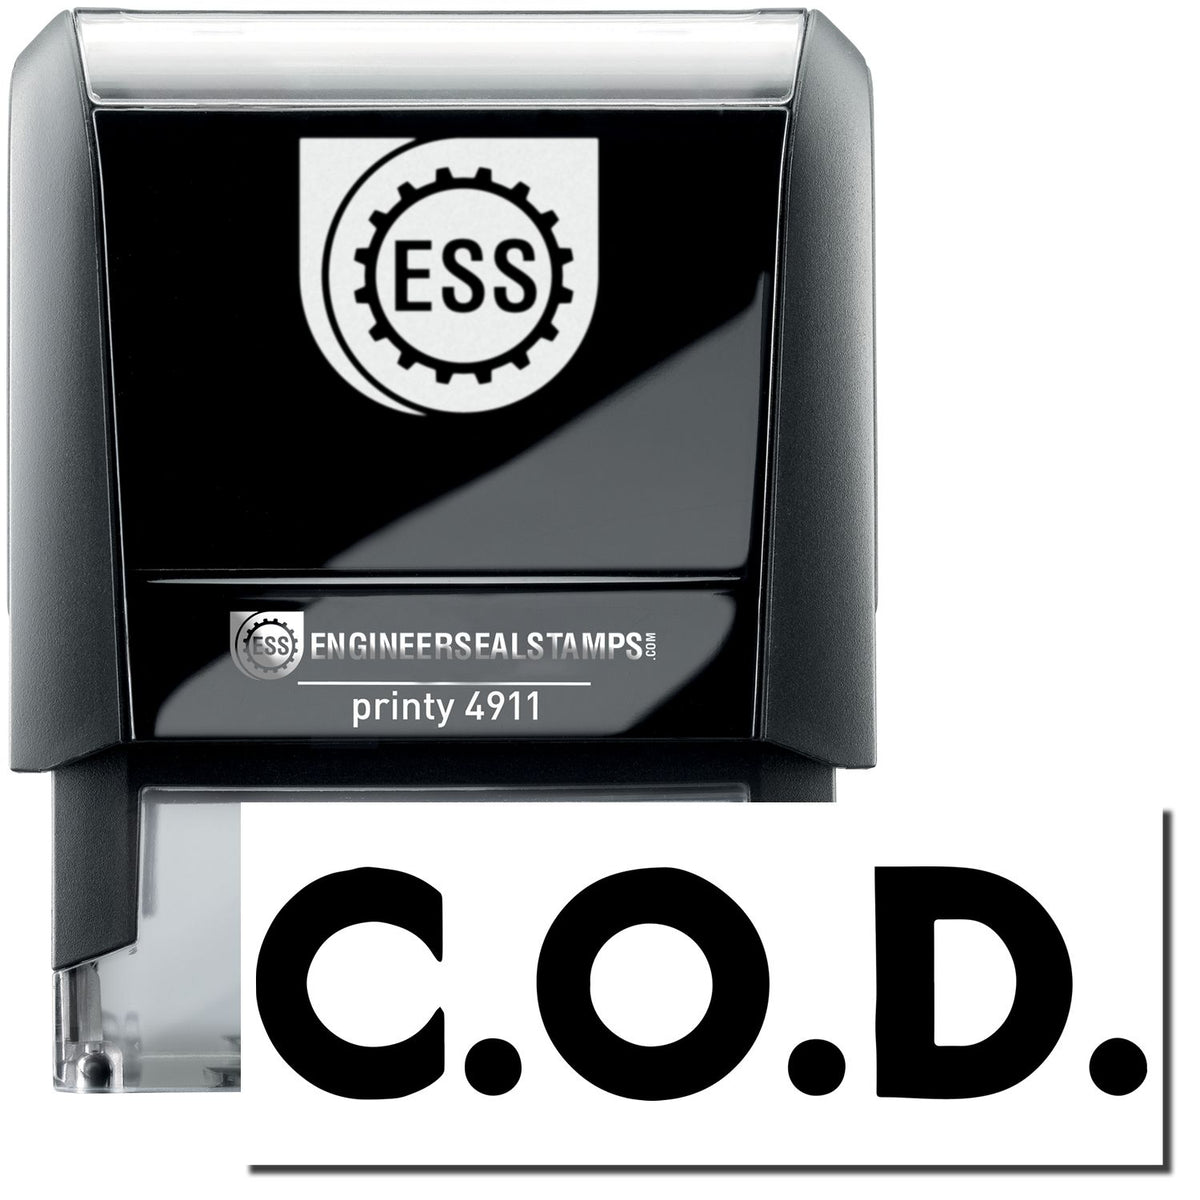 A self-inking stamp with a stamped image showing how the text &quot;C.O.D.&quot; in bold font is displayed after stamping.